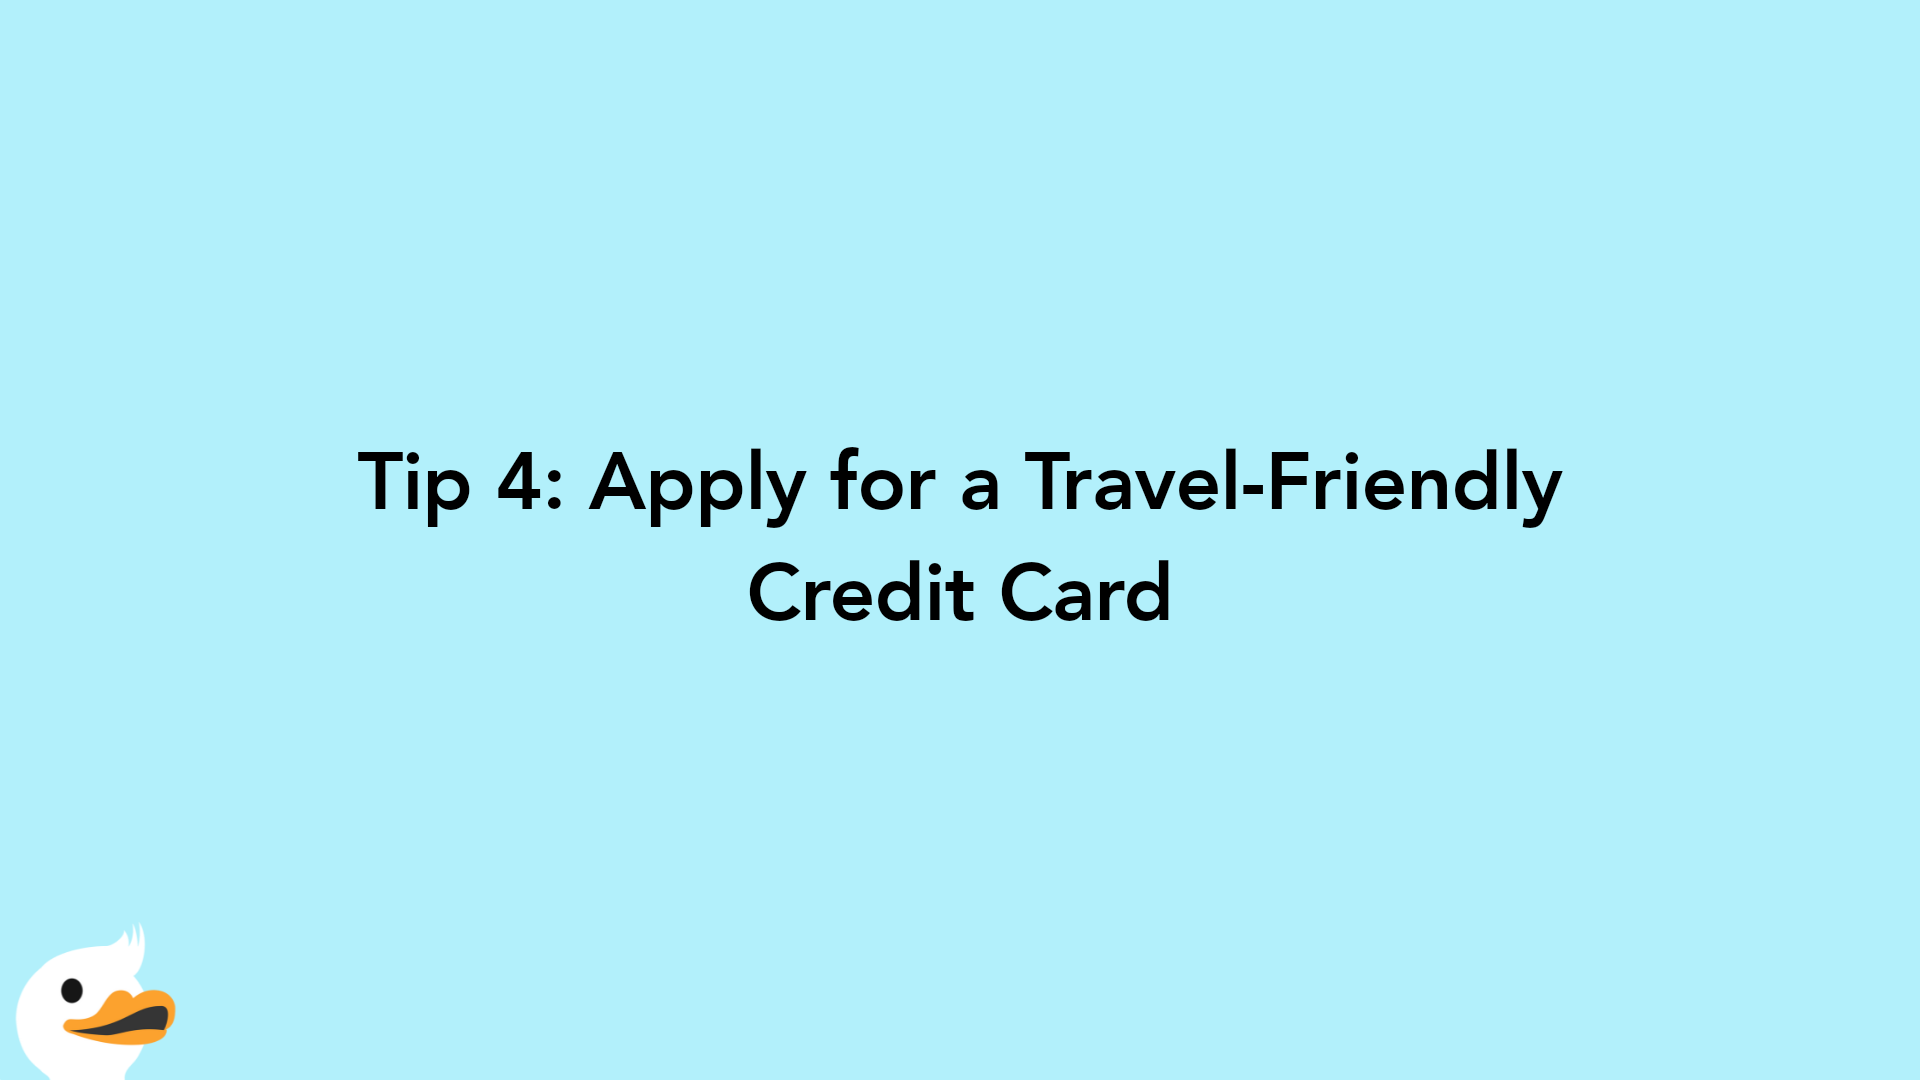 Tip 4: Apply for a Travel-Friendly Credit Card